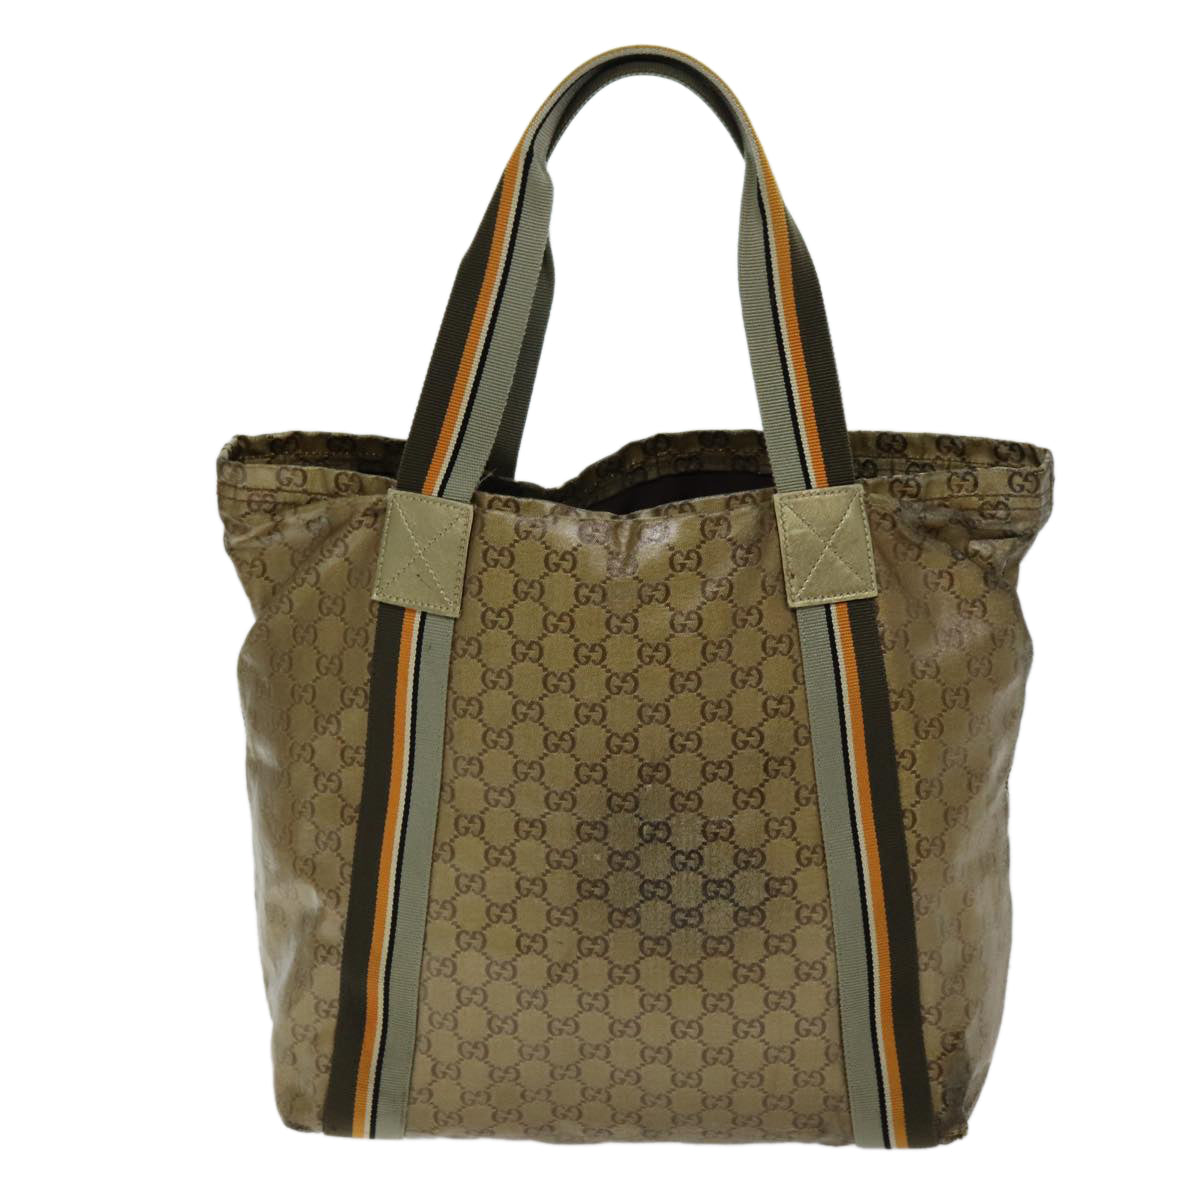 GUCCI GG Crystal Tote Bag Gold Gray Brown 189669 Auth 75345 - 0